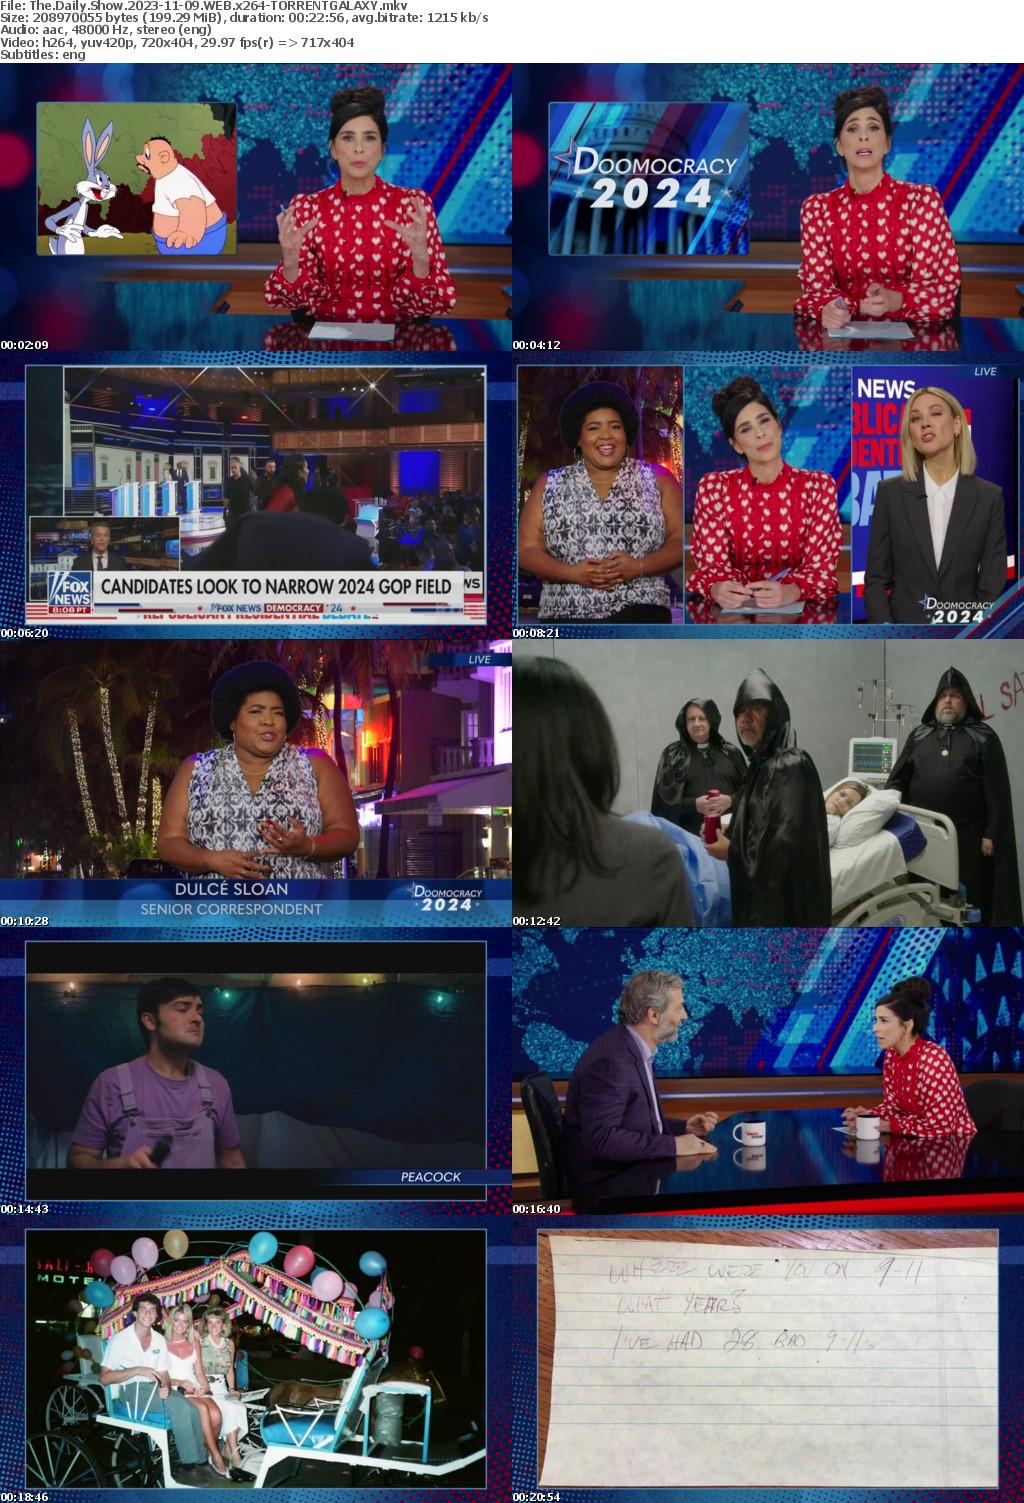 The Daily Show 2023-11-09 WEB x264-GALAXY